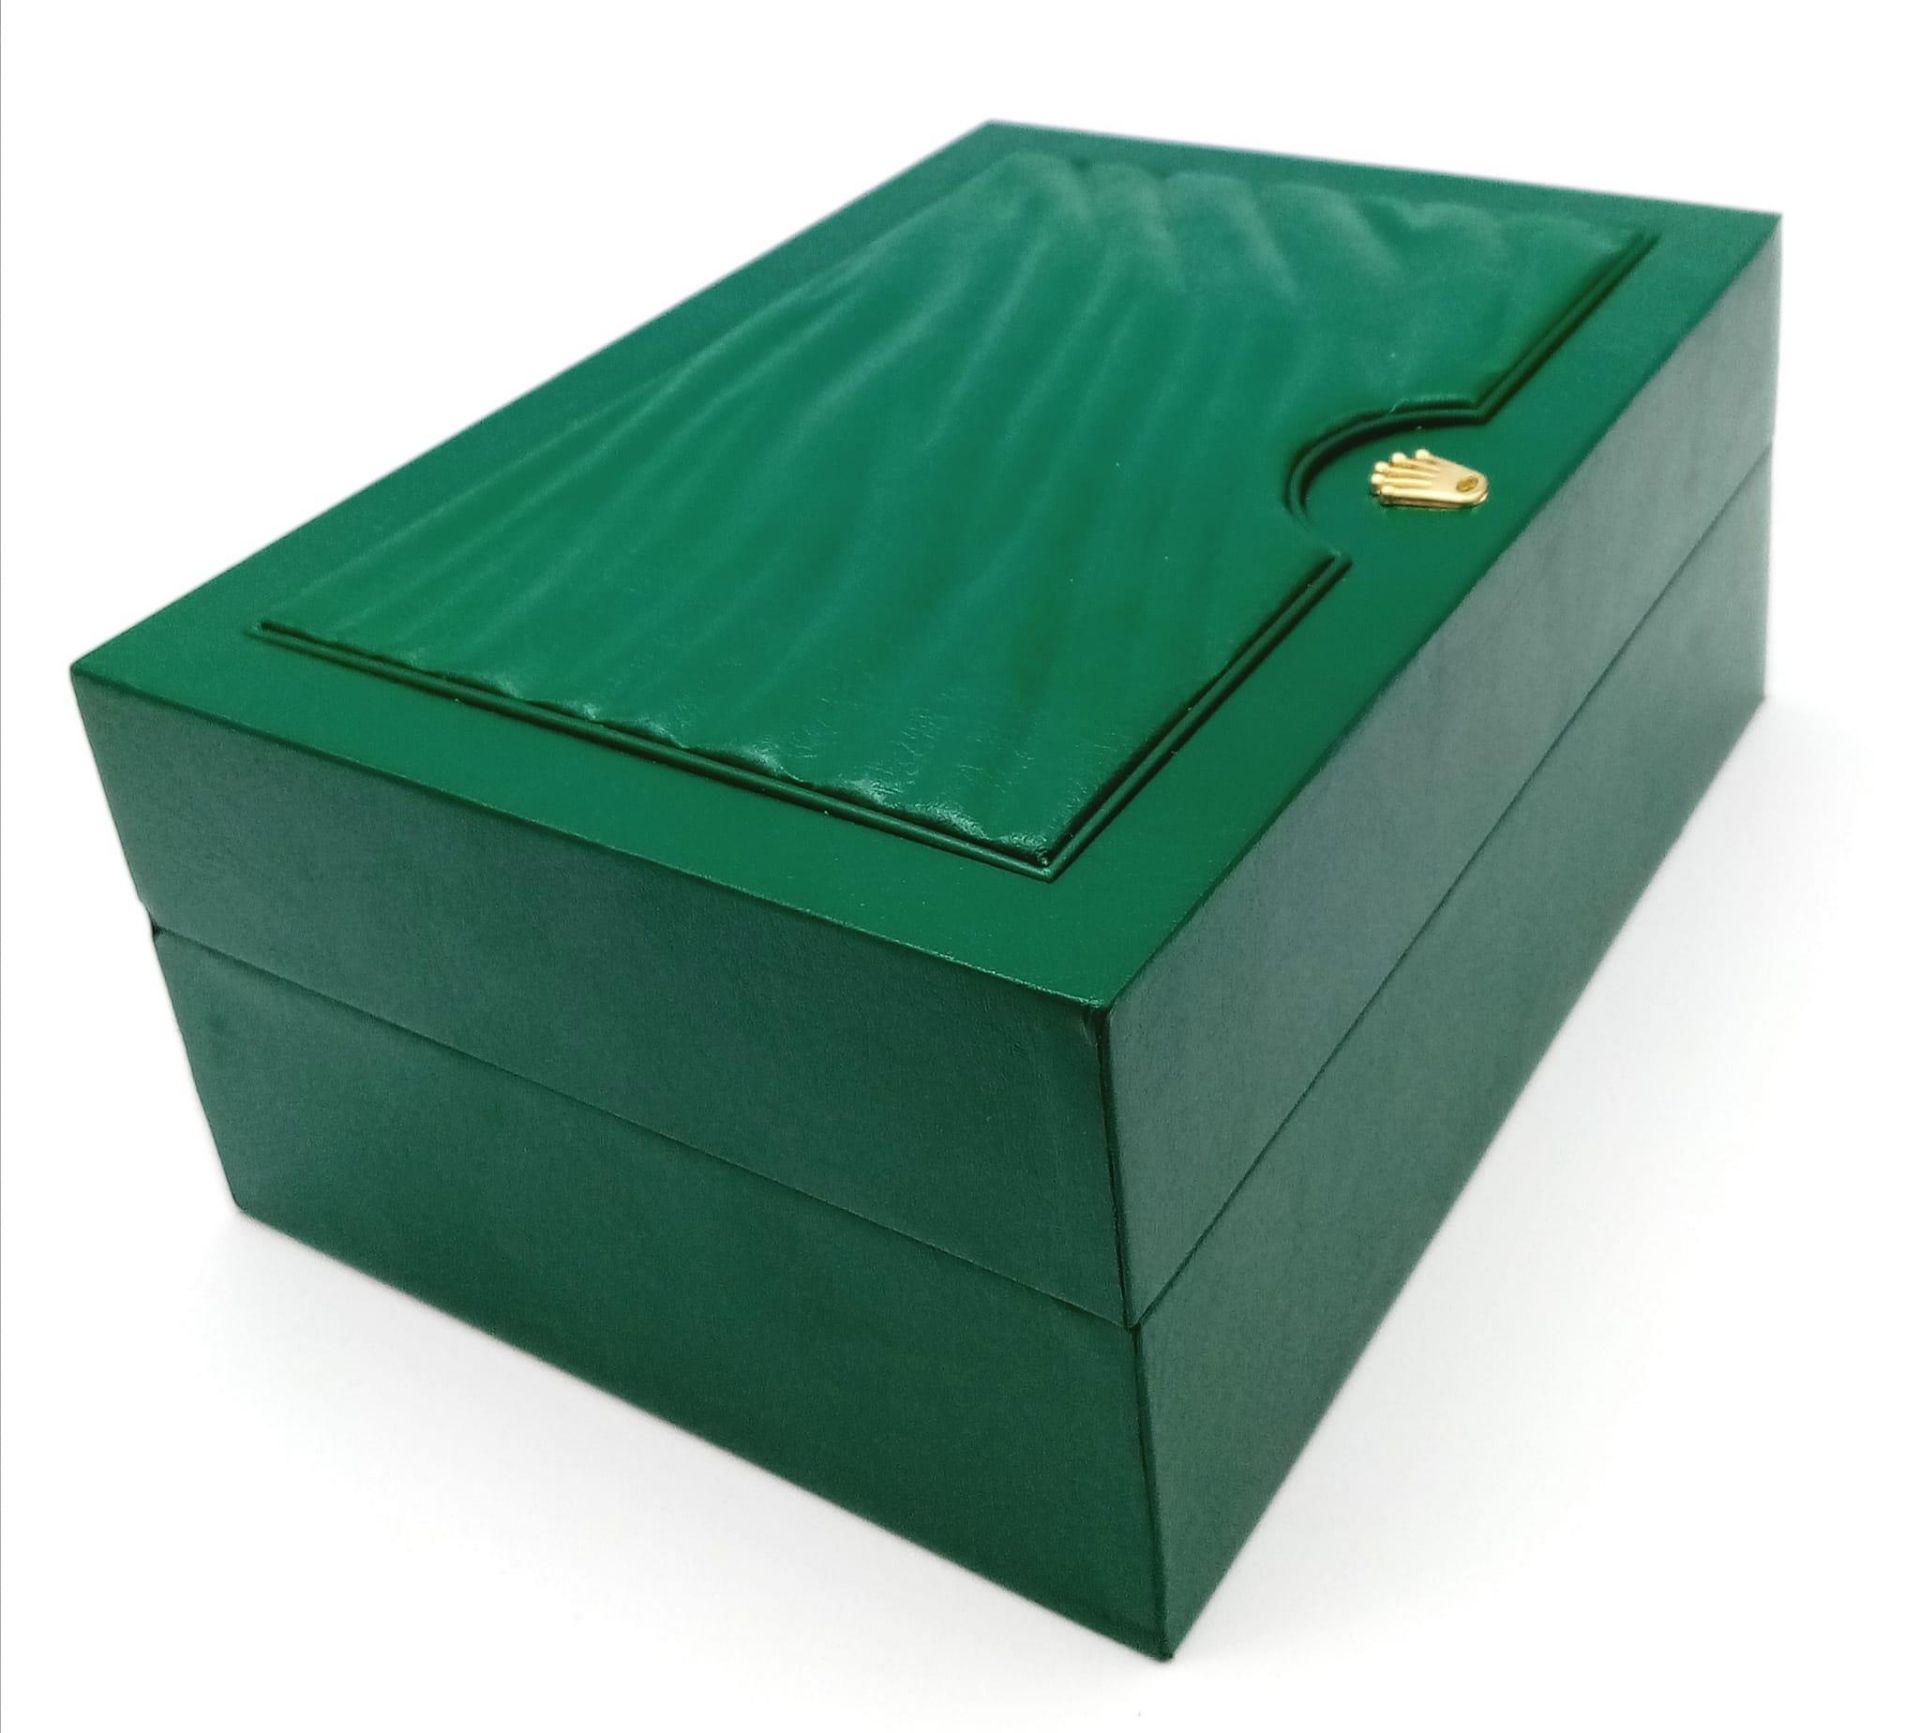 A Rolex Watch Case. Green ruffled exterior. Single watch space interior. 18cm x 13cm - Image 3 of 13